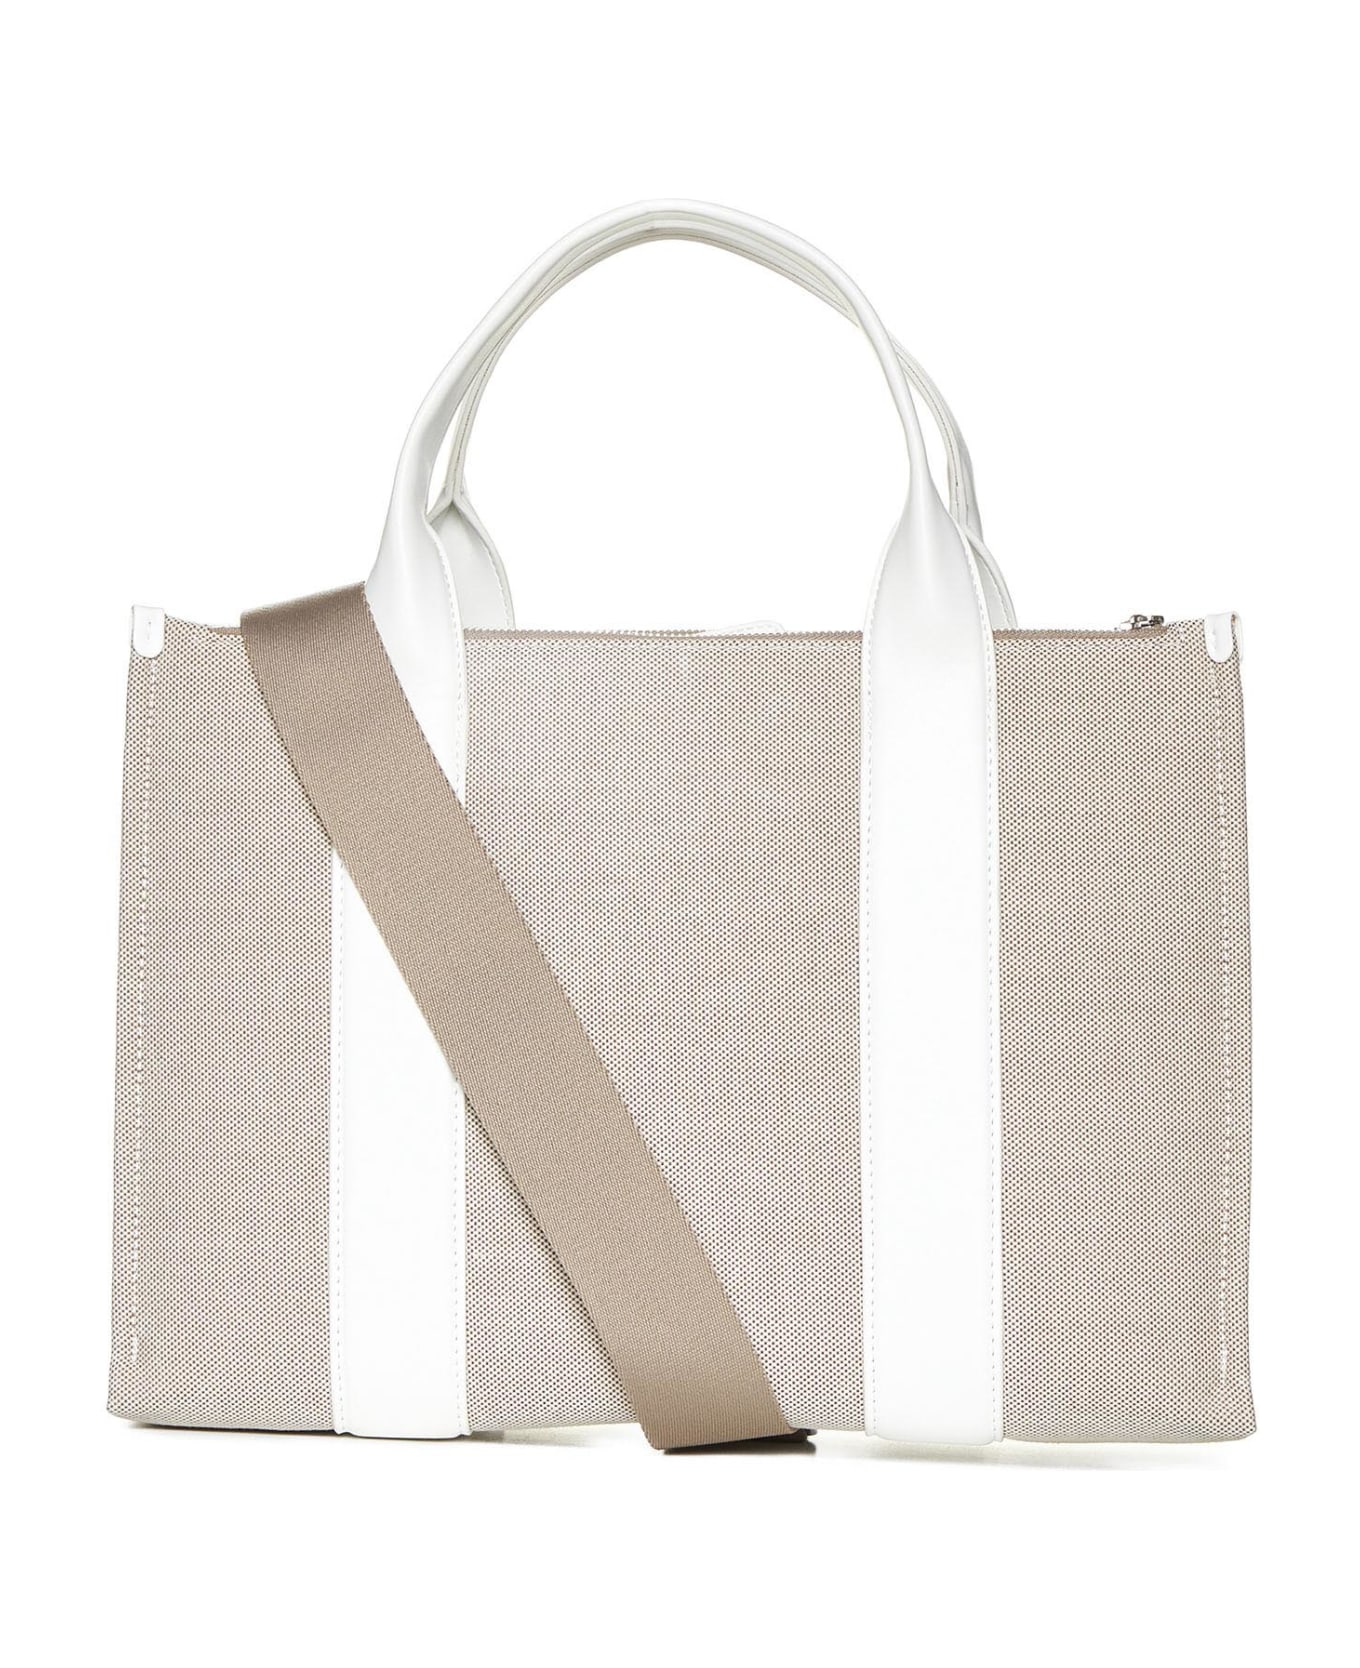 DKNY Tote - Natural/white トートバッグ